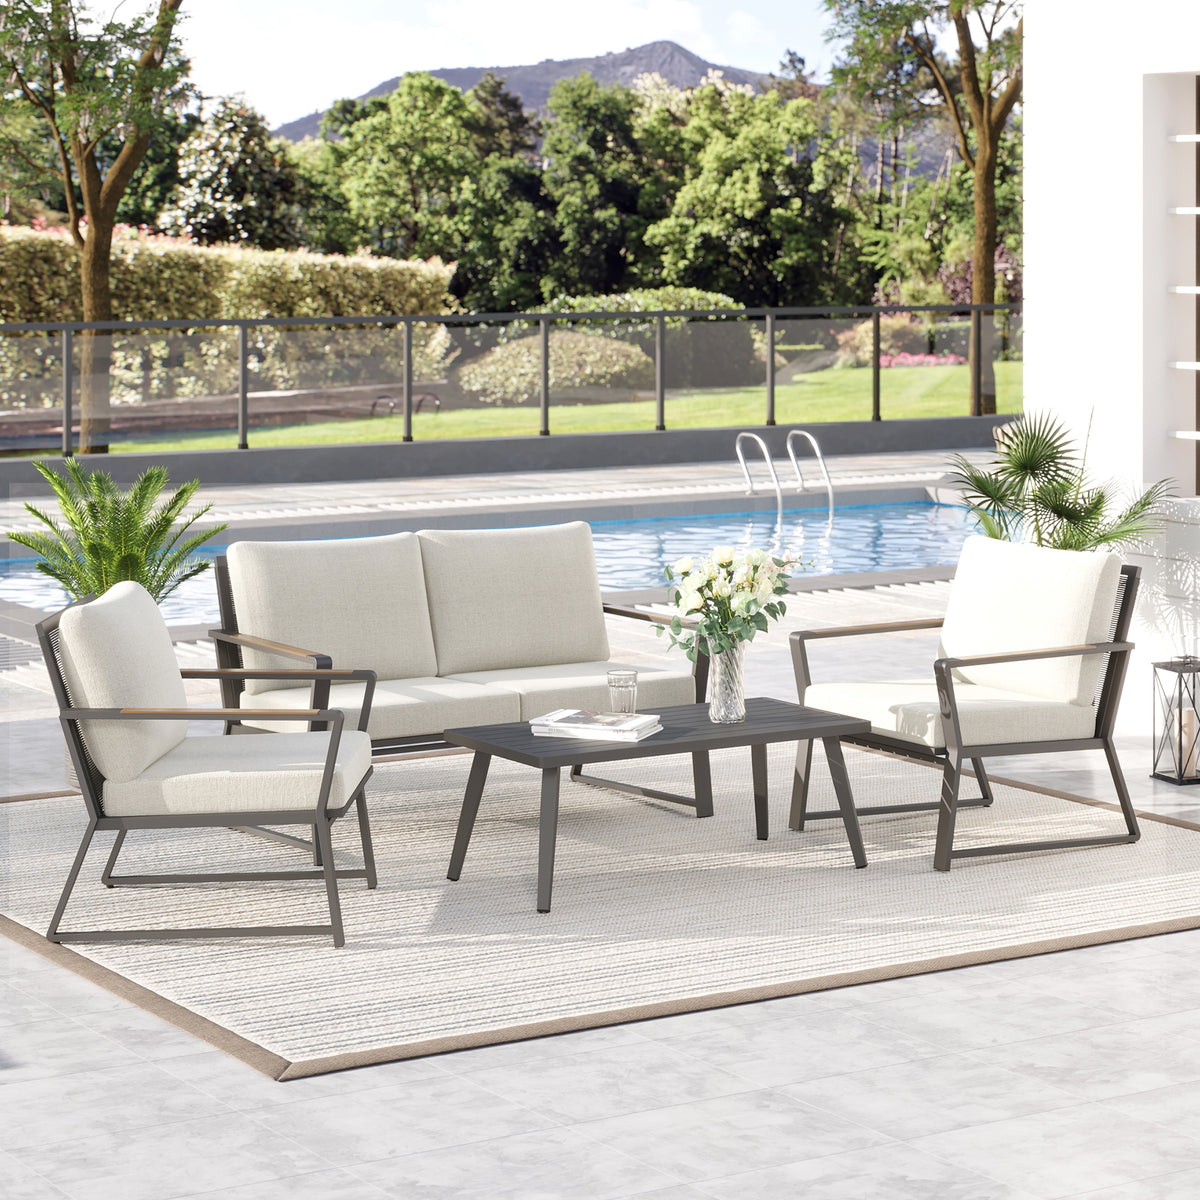 Outdoor Garden Sofa Set with Armchairs, Loveseat, Coffee Table and Cushions